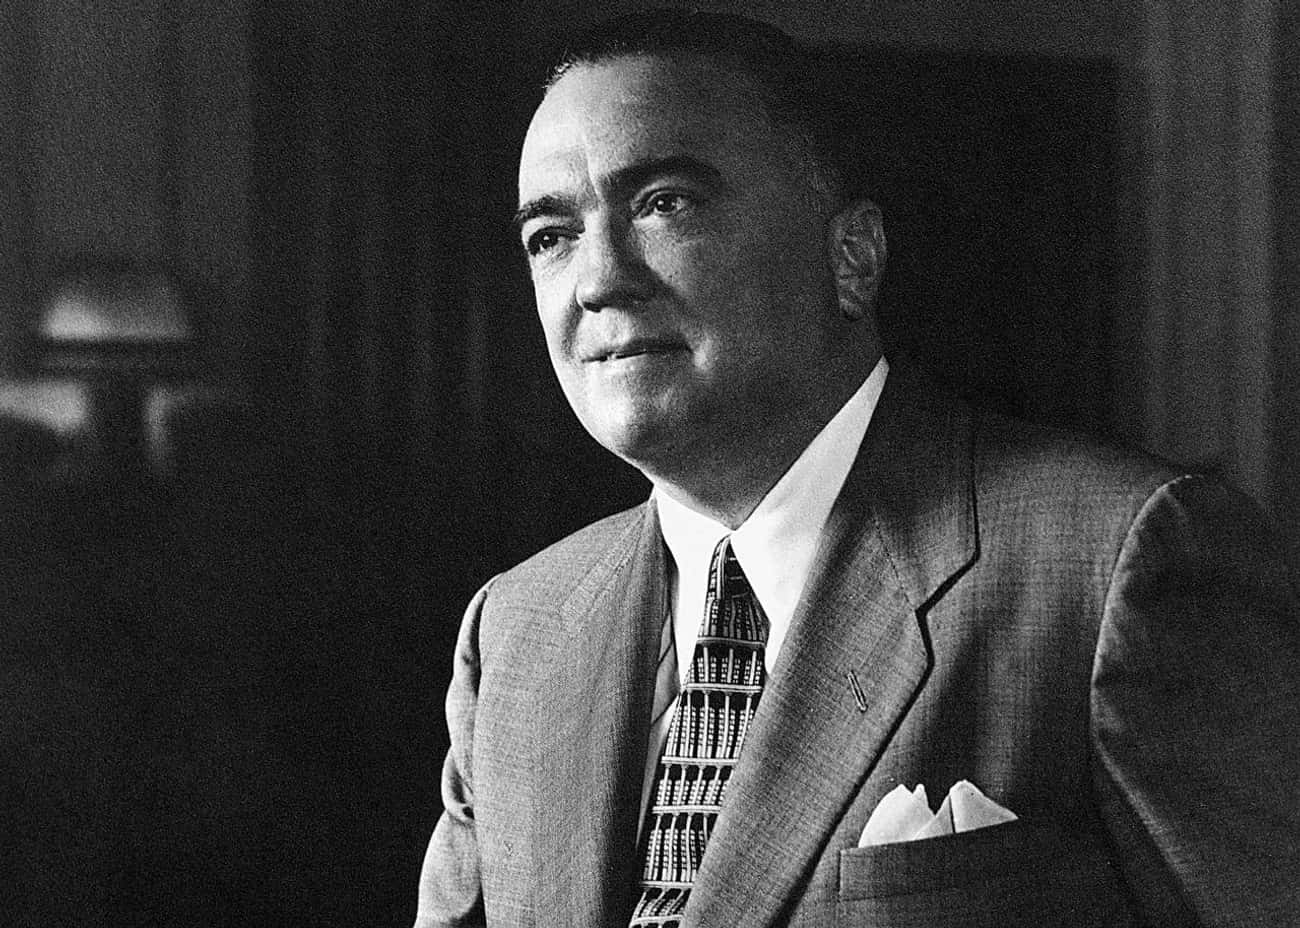 J. Edgar Hoover Maintained His Power Using A Secret File